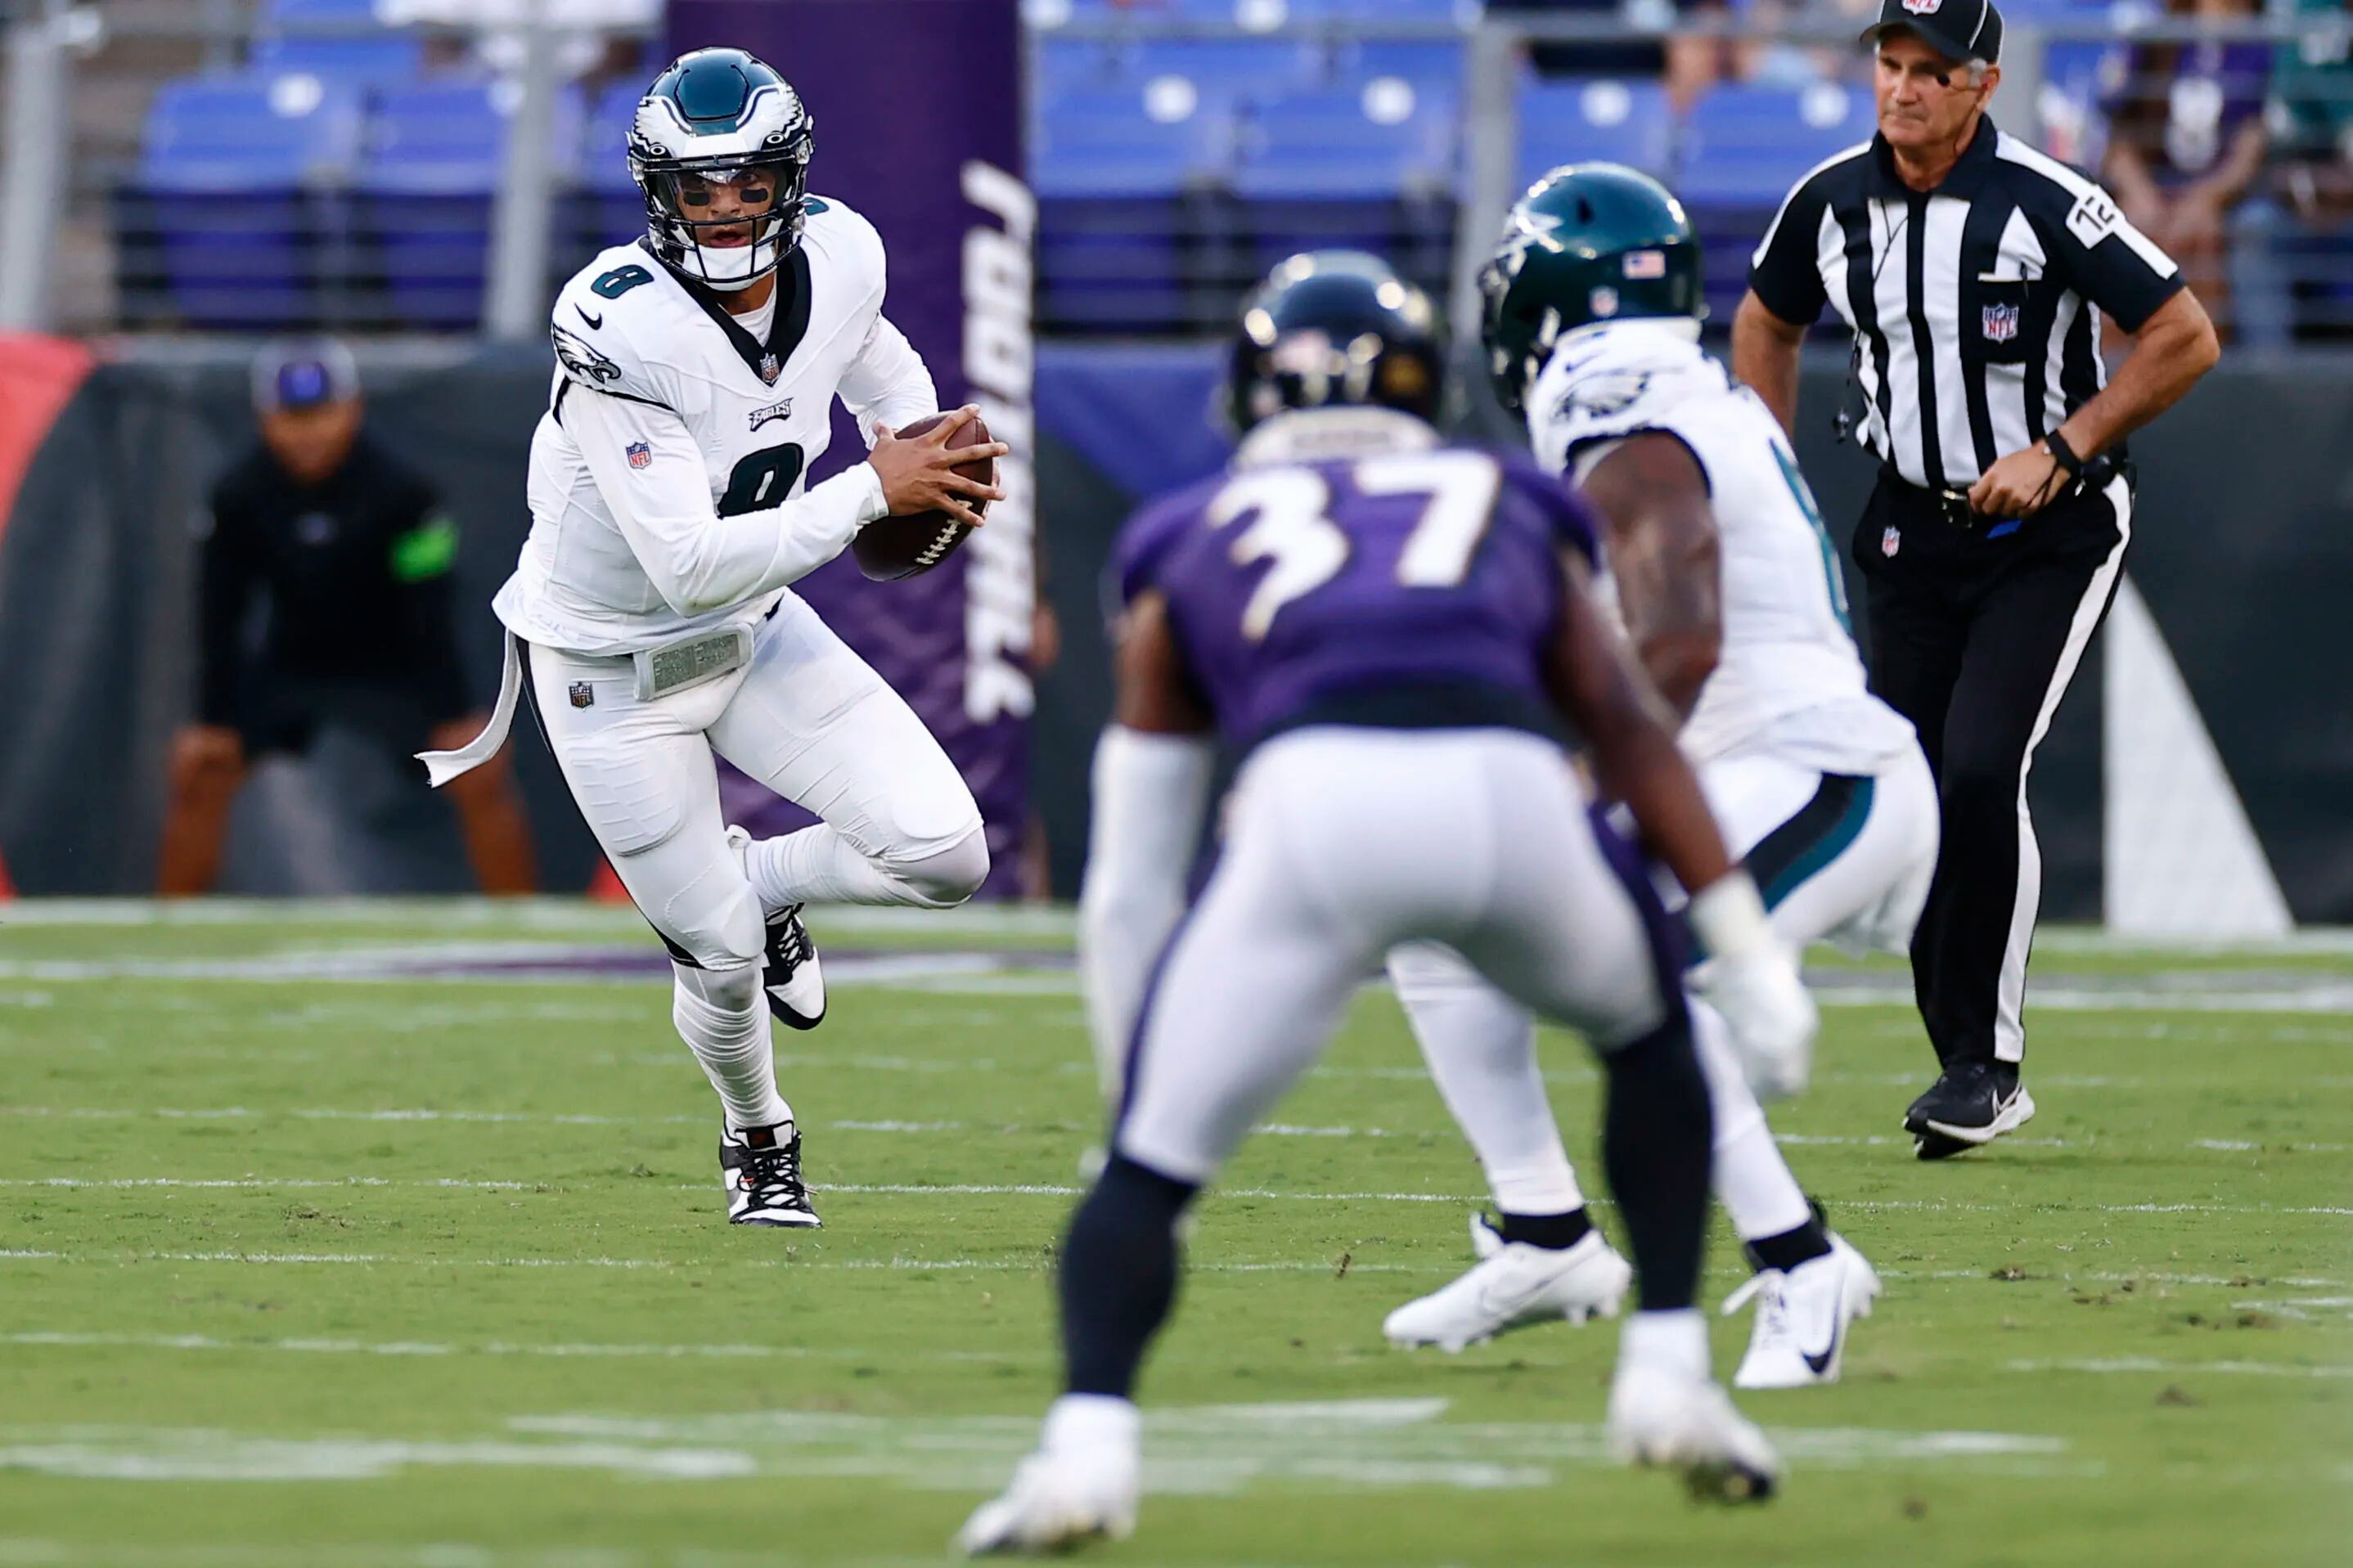 See photos from the Philadelphia Eagles preseason game against the